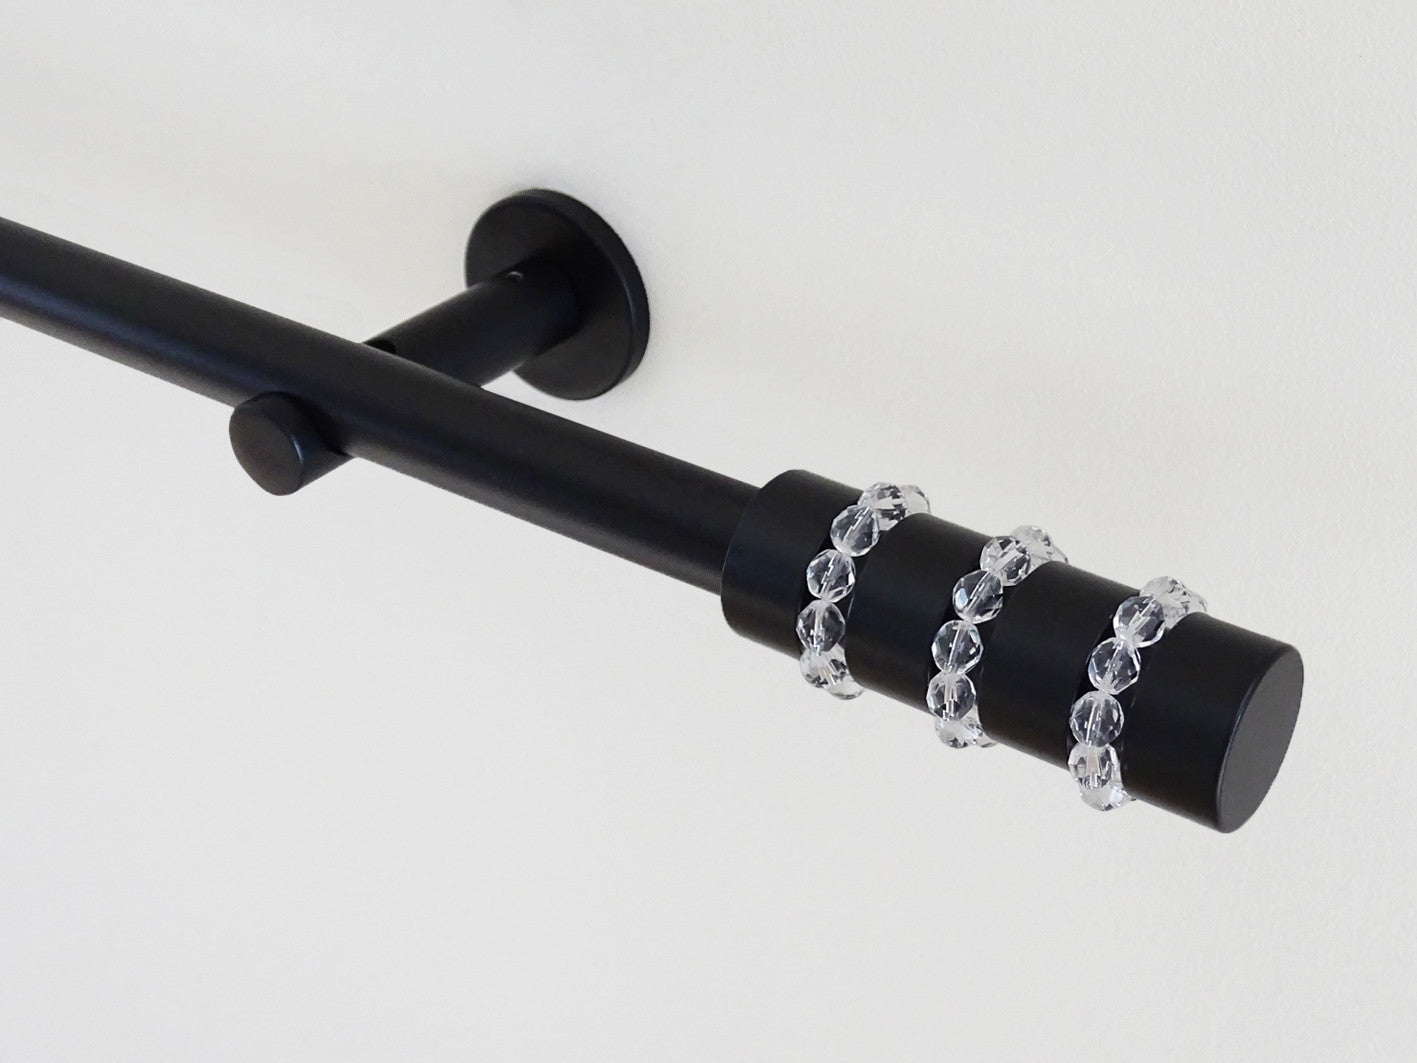 19mm diameter black metal curtain pole set with clear beaded finials